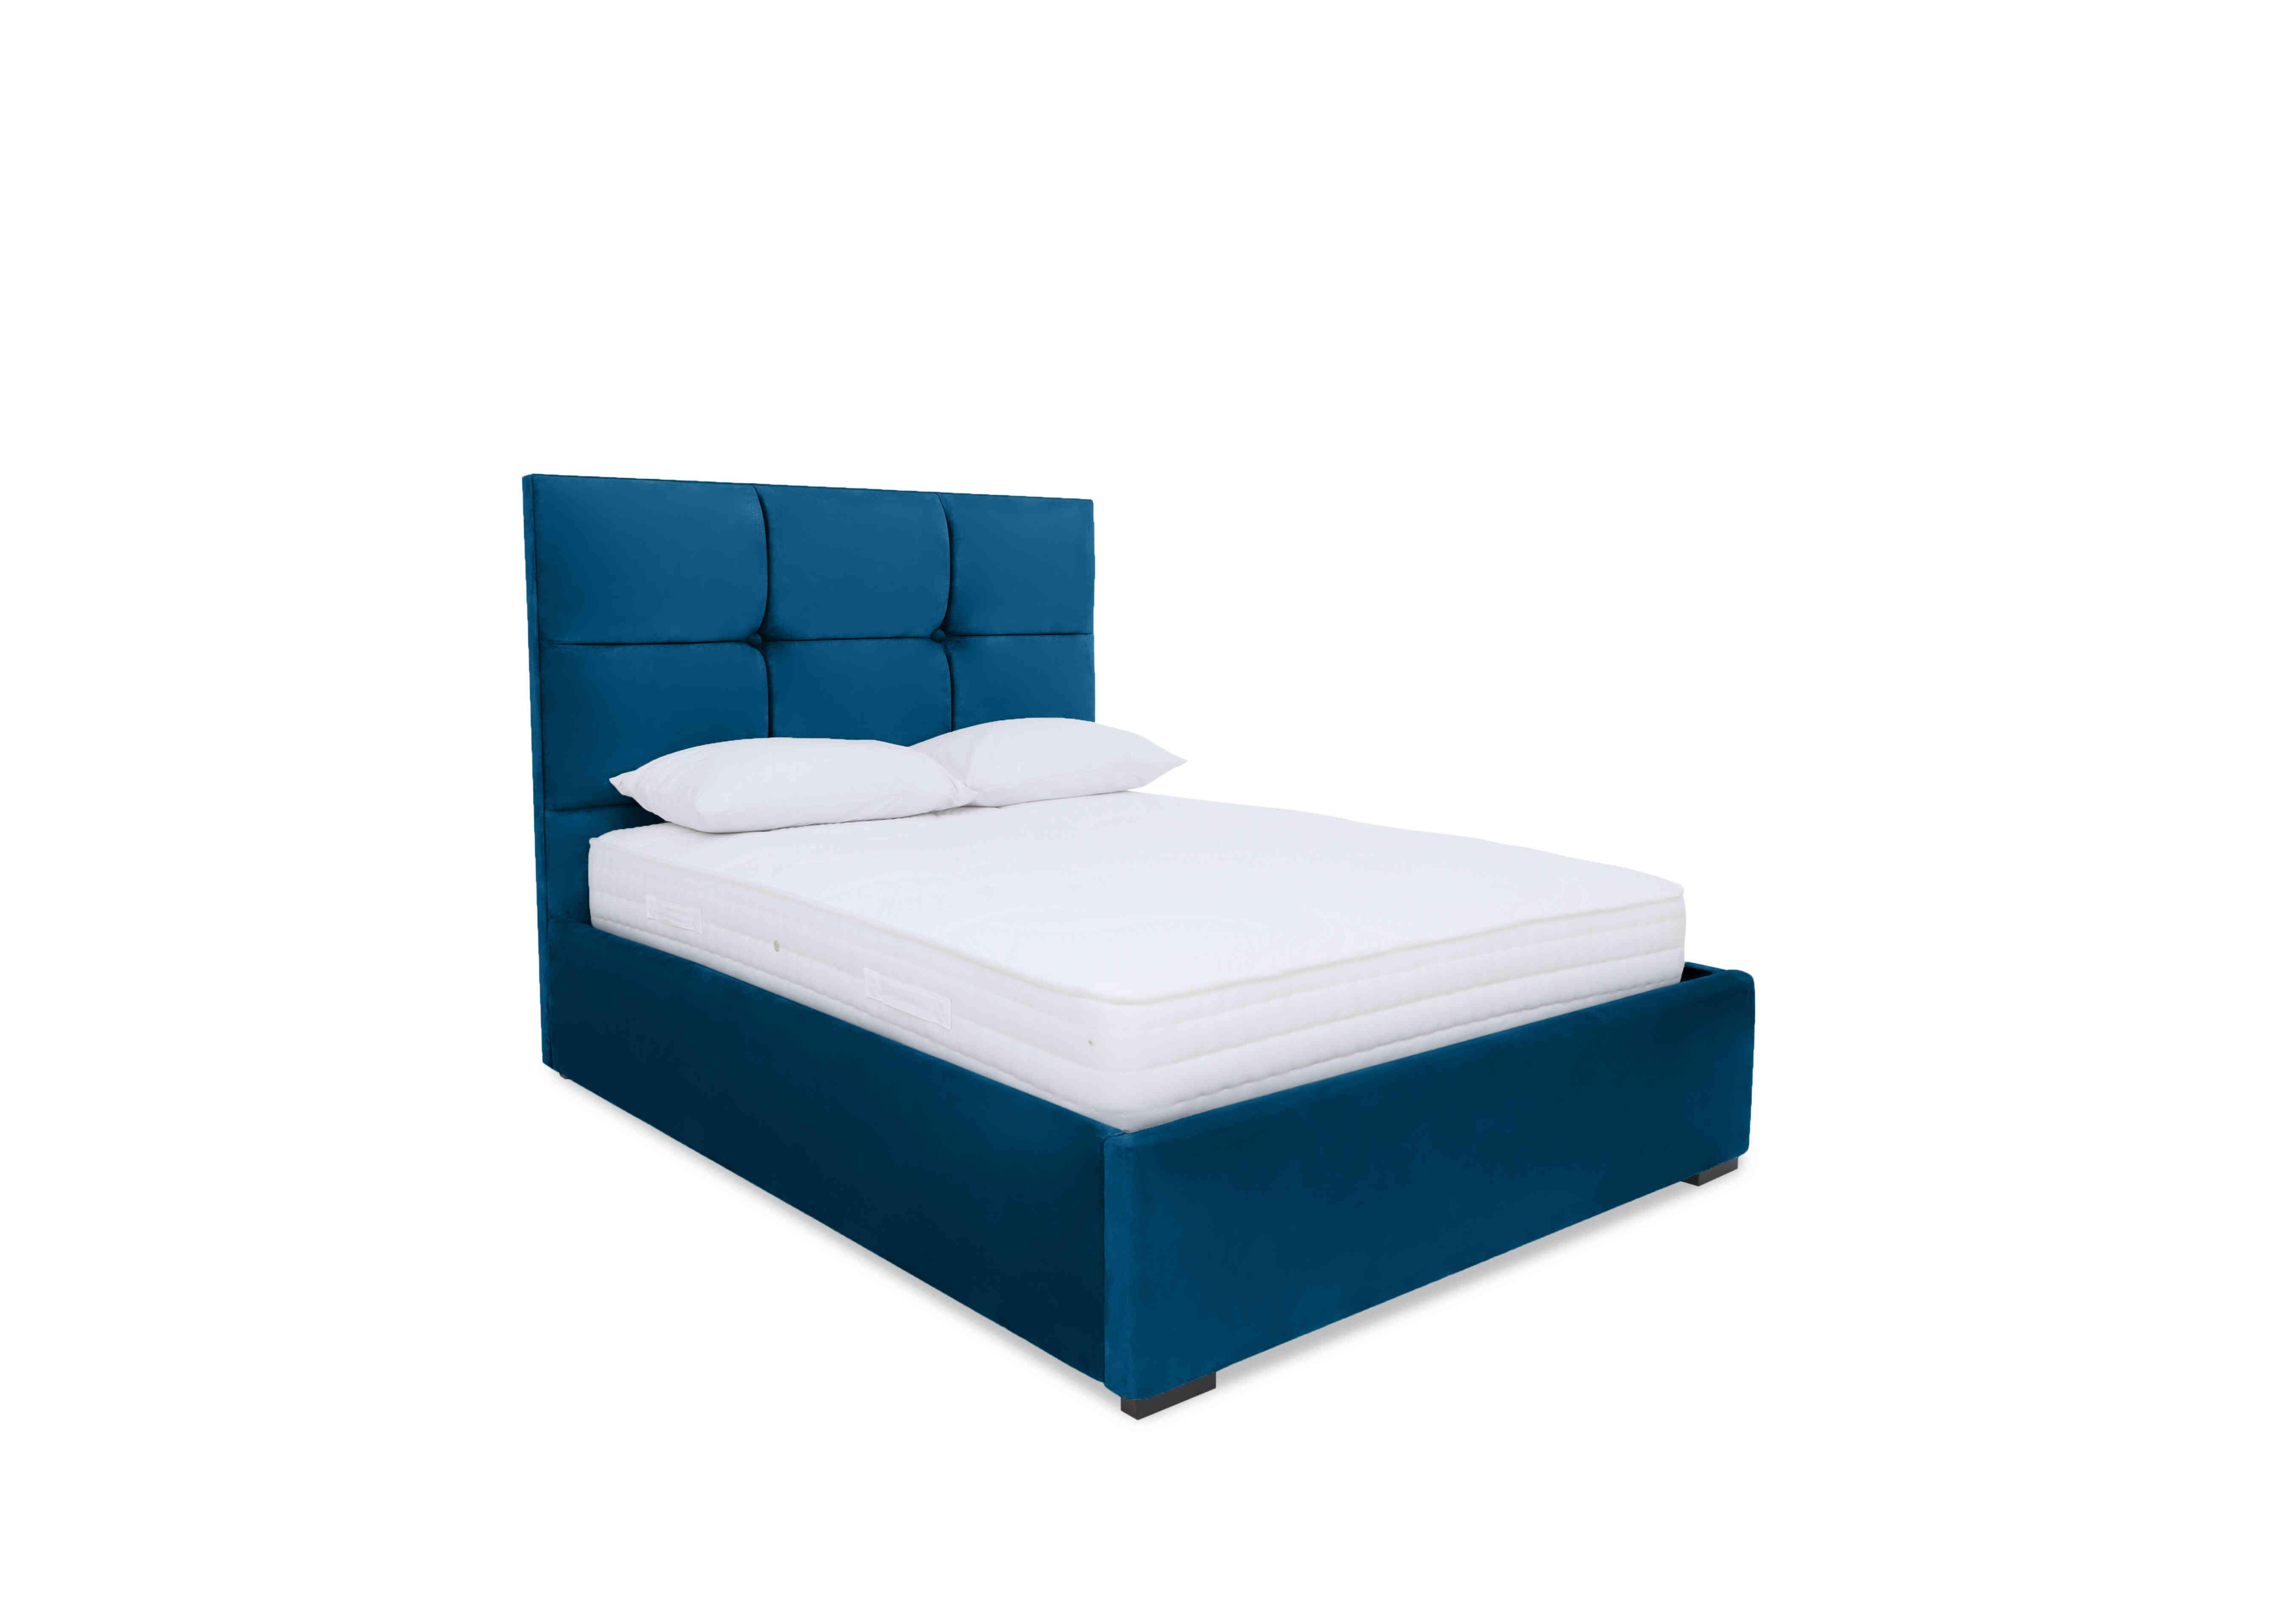 Rubix Ottoman Bed Frame in Plush Pacific on Furniture Village